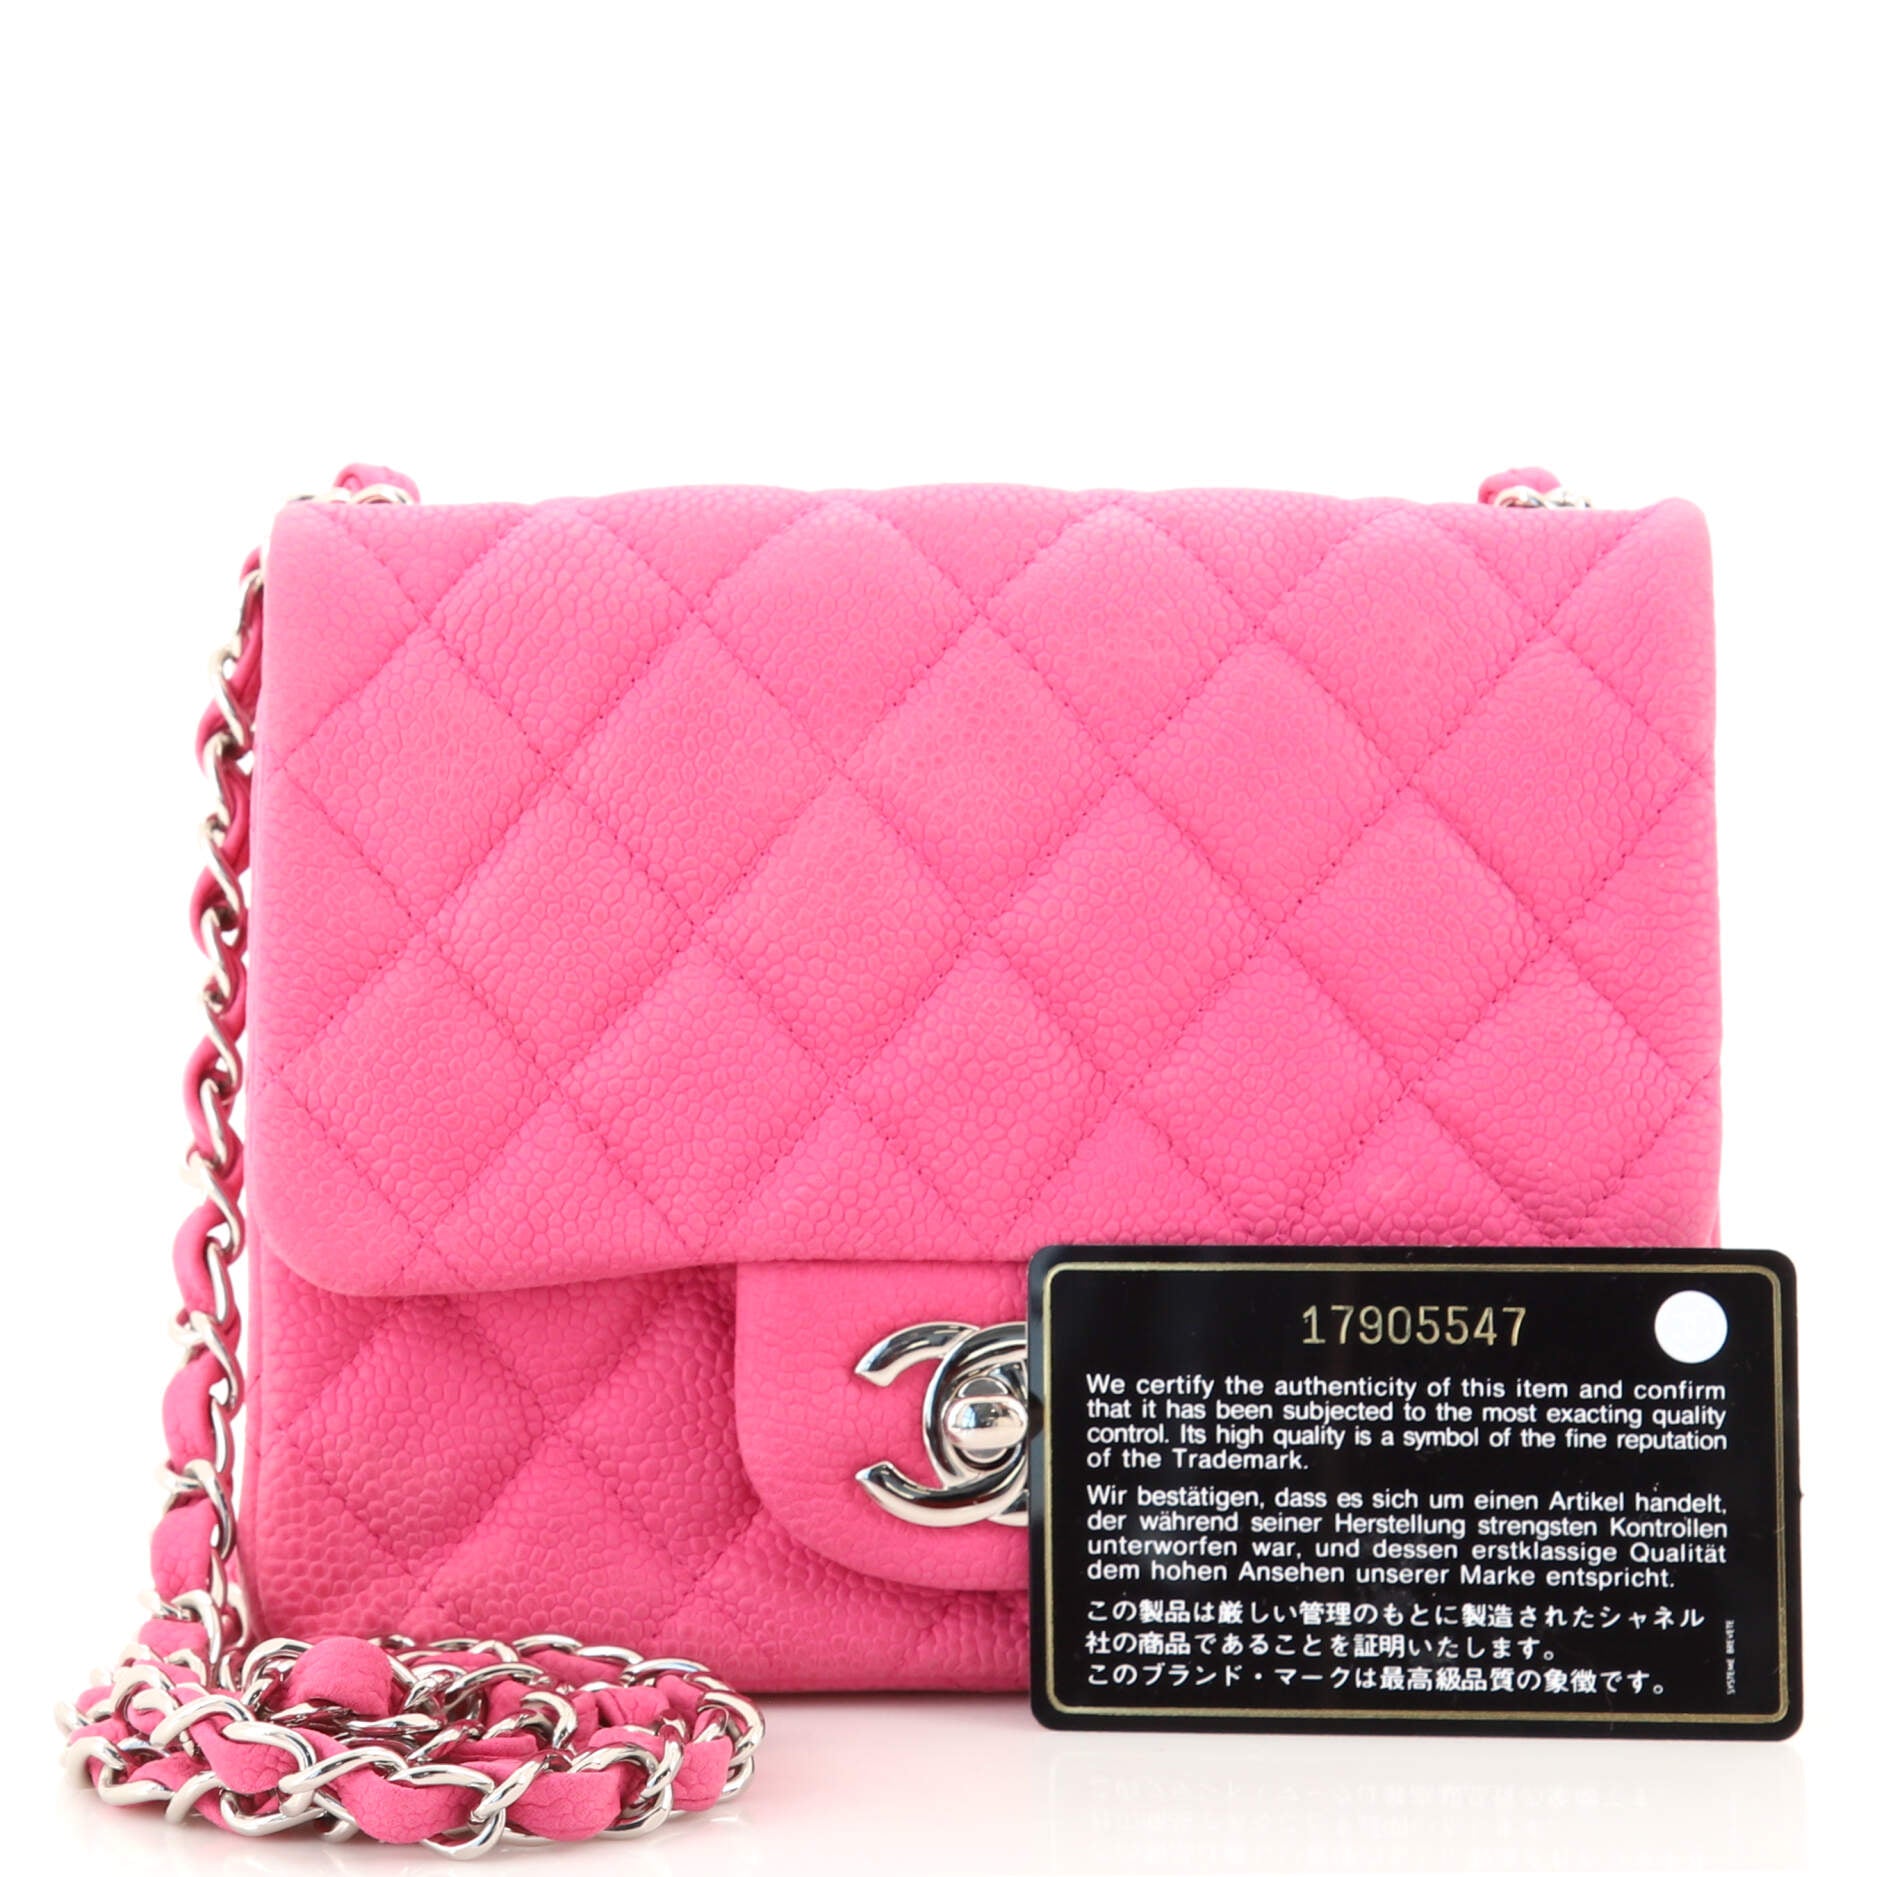 CHANEL Square Classic Single Flap Bag Quilted Matte Caviar Mini